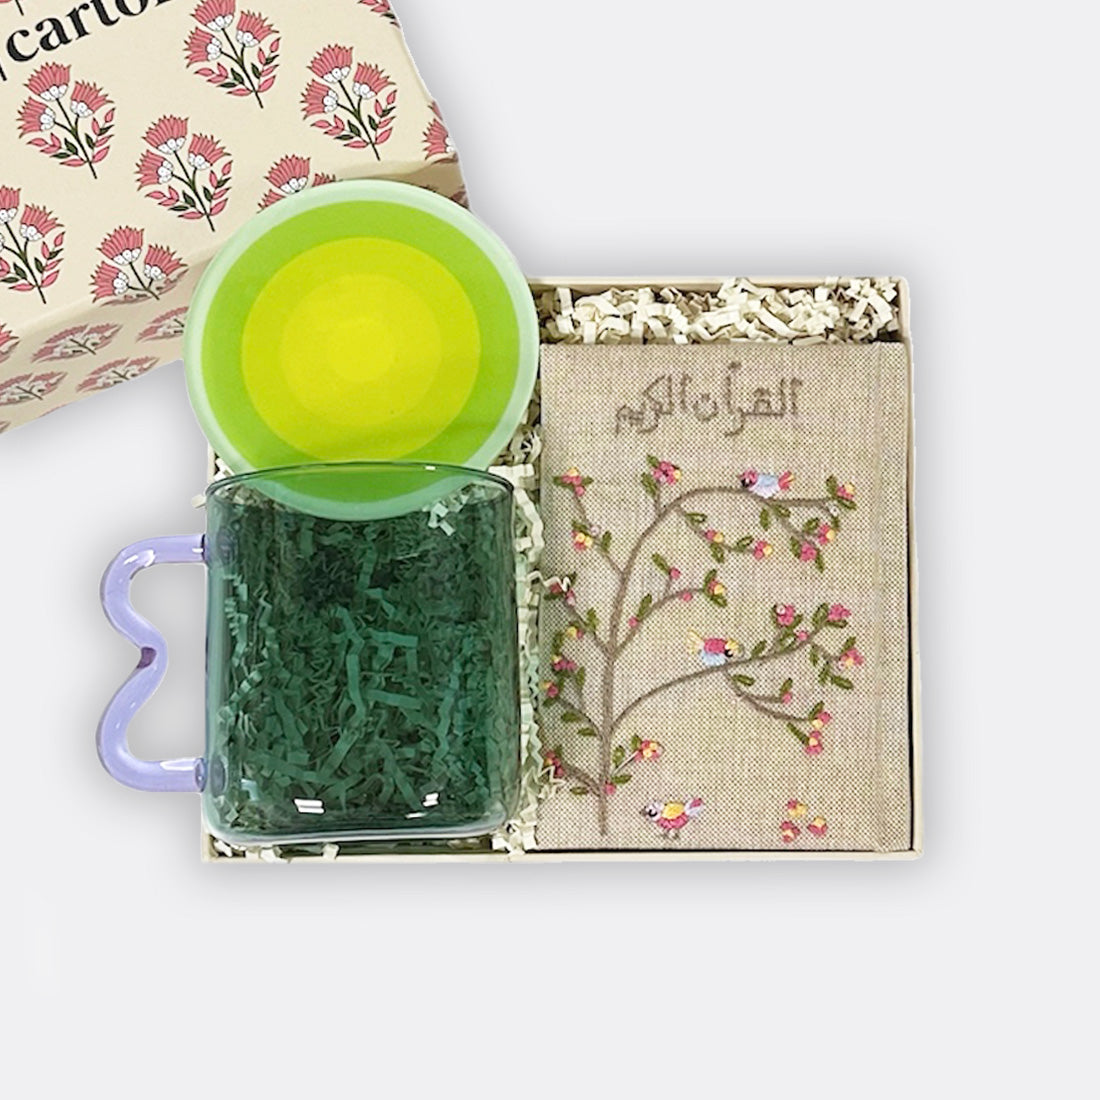  Hand embroidered Quran, Borosilicate Glass Mug, Spiral Coaster, shop the best ramadan gift gifts for her for him from Inna carton online store dubai, UAE!